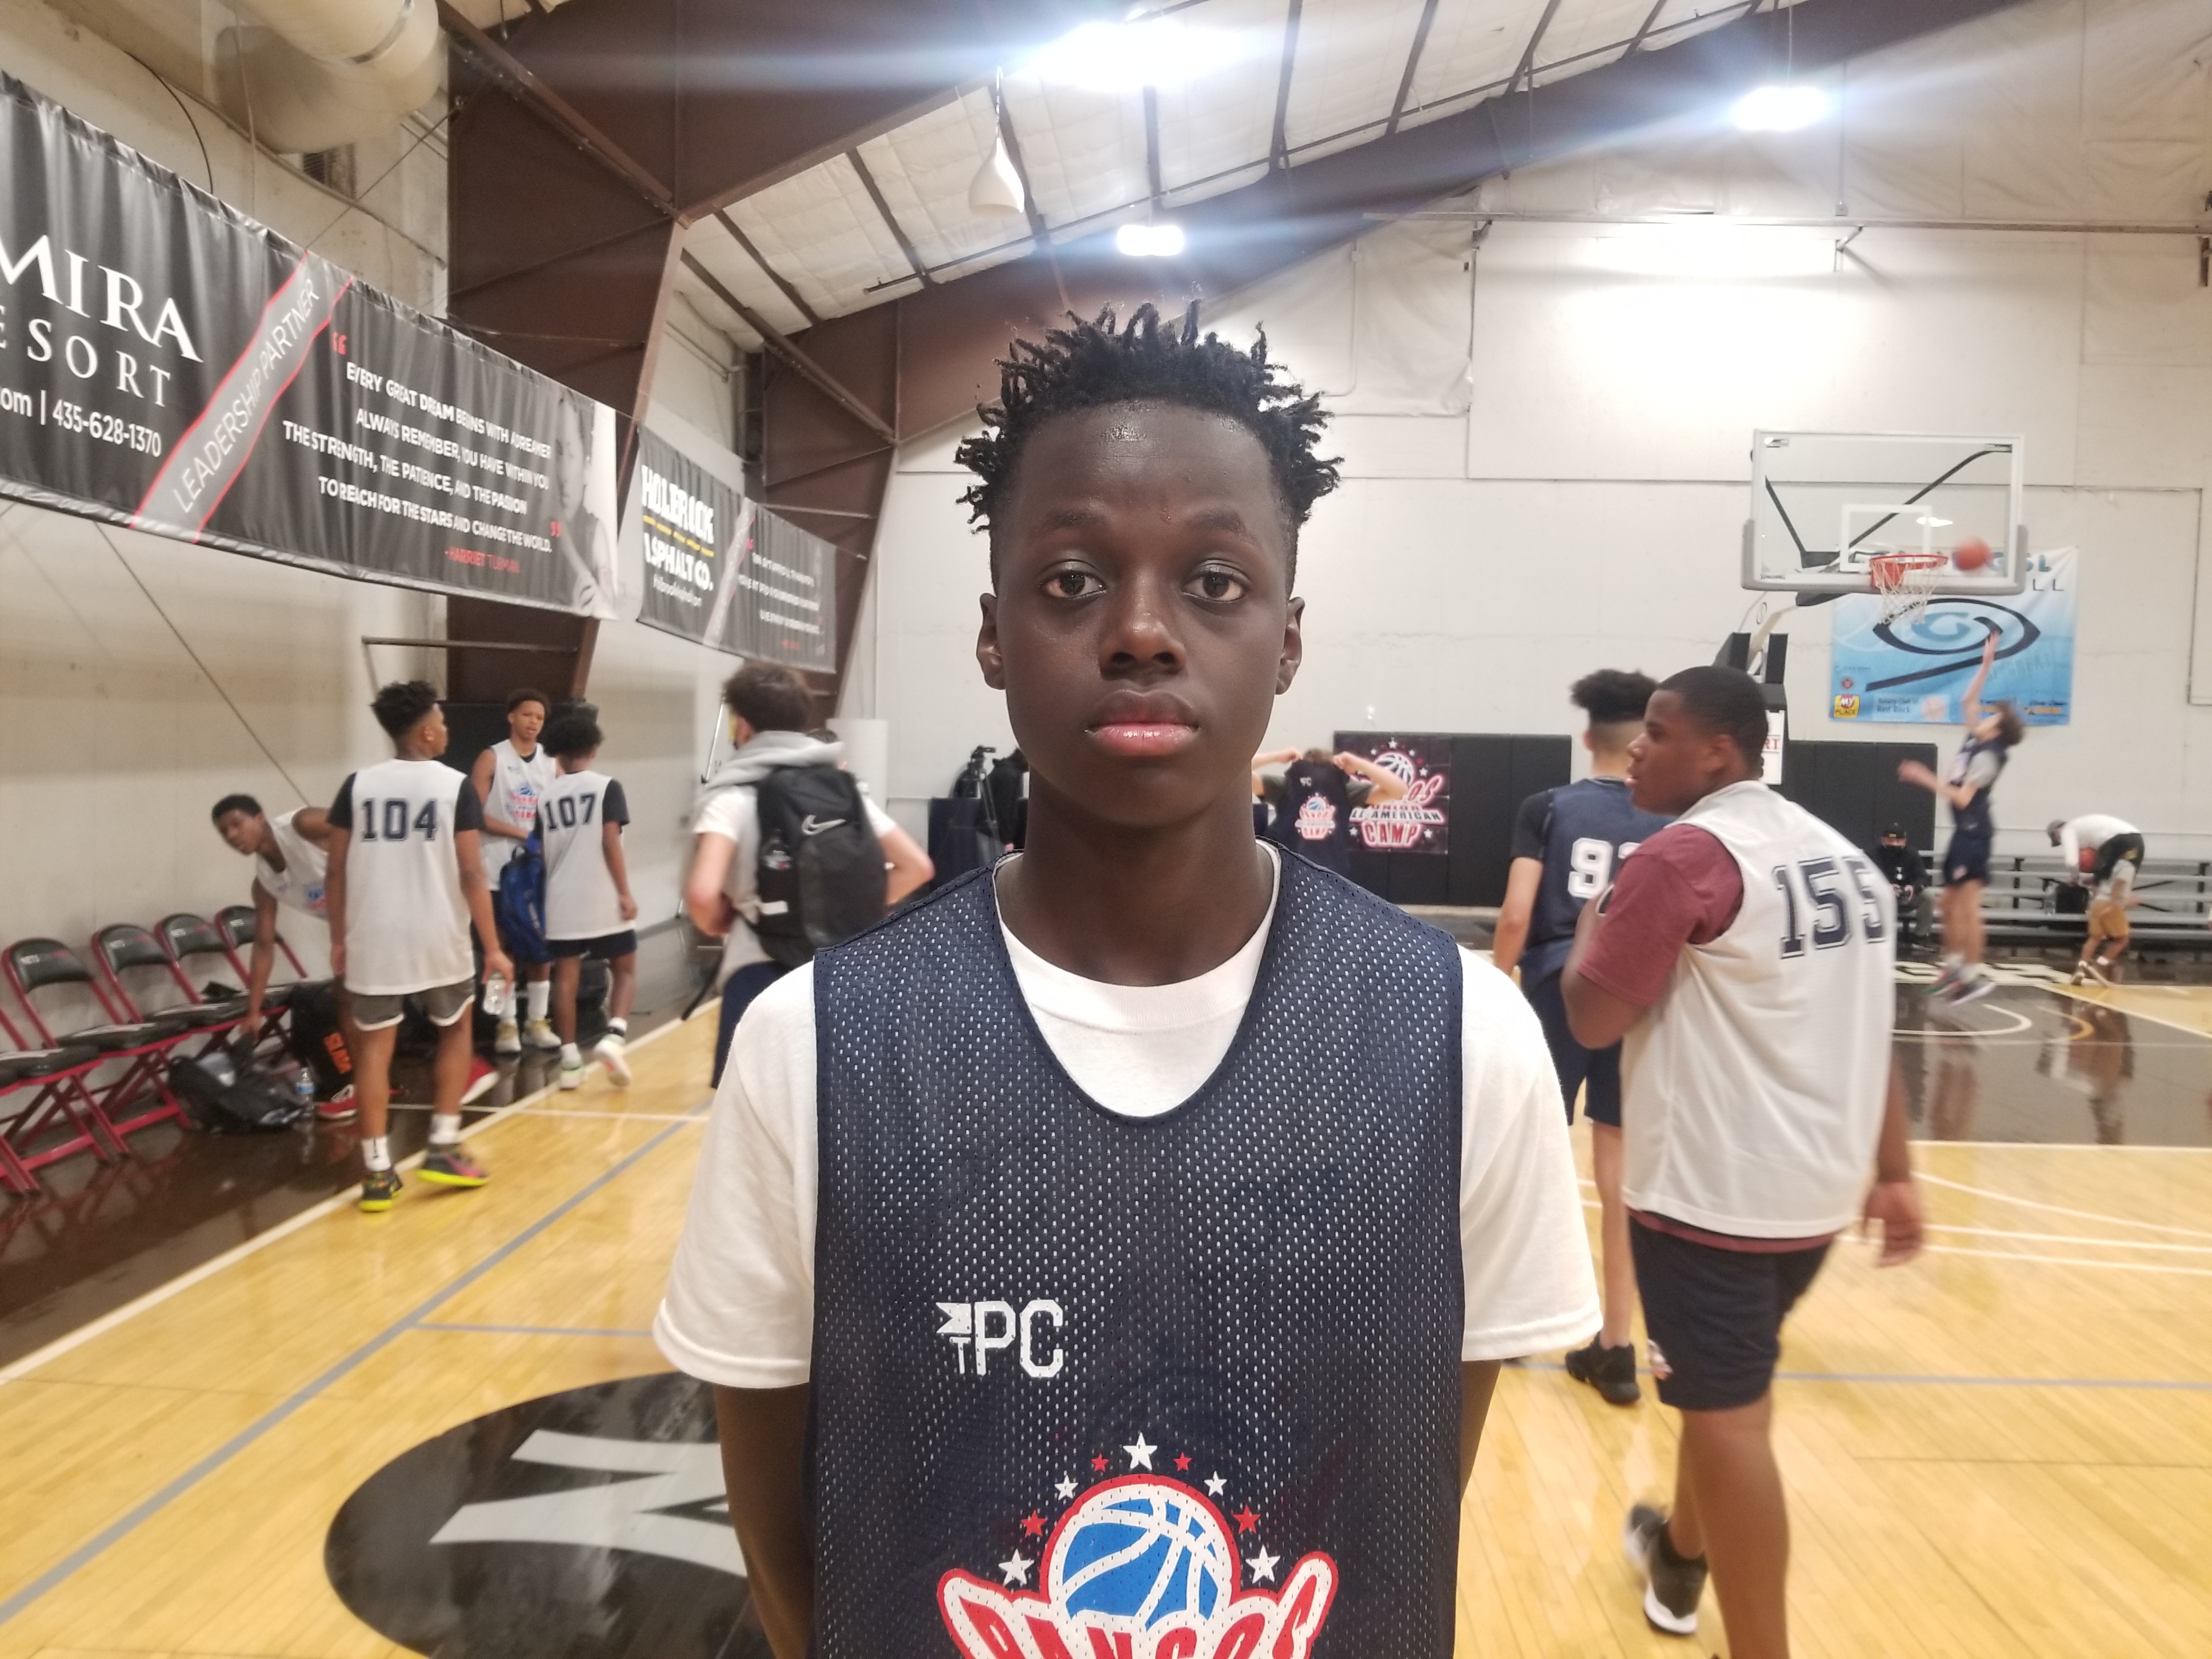 Top 100 Players to Watch – Class of 2025